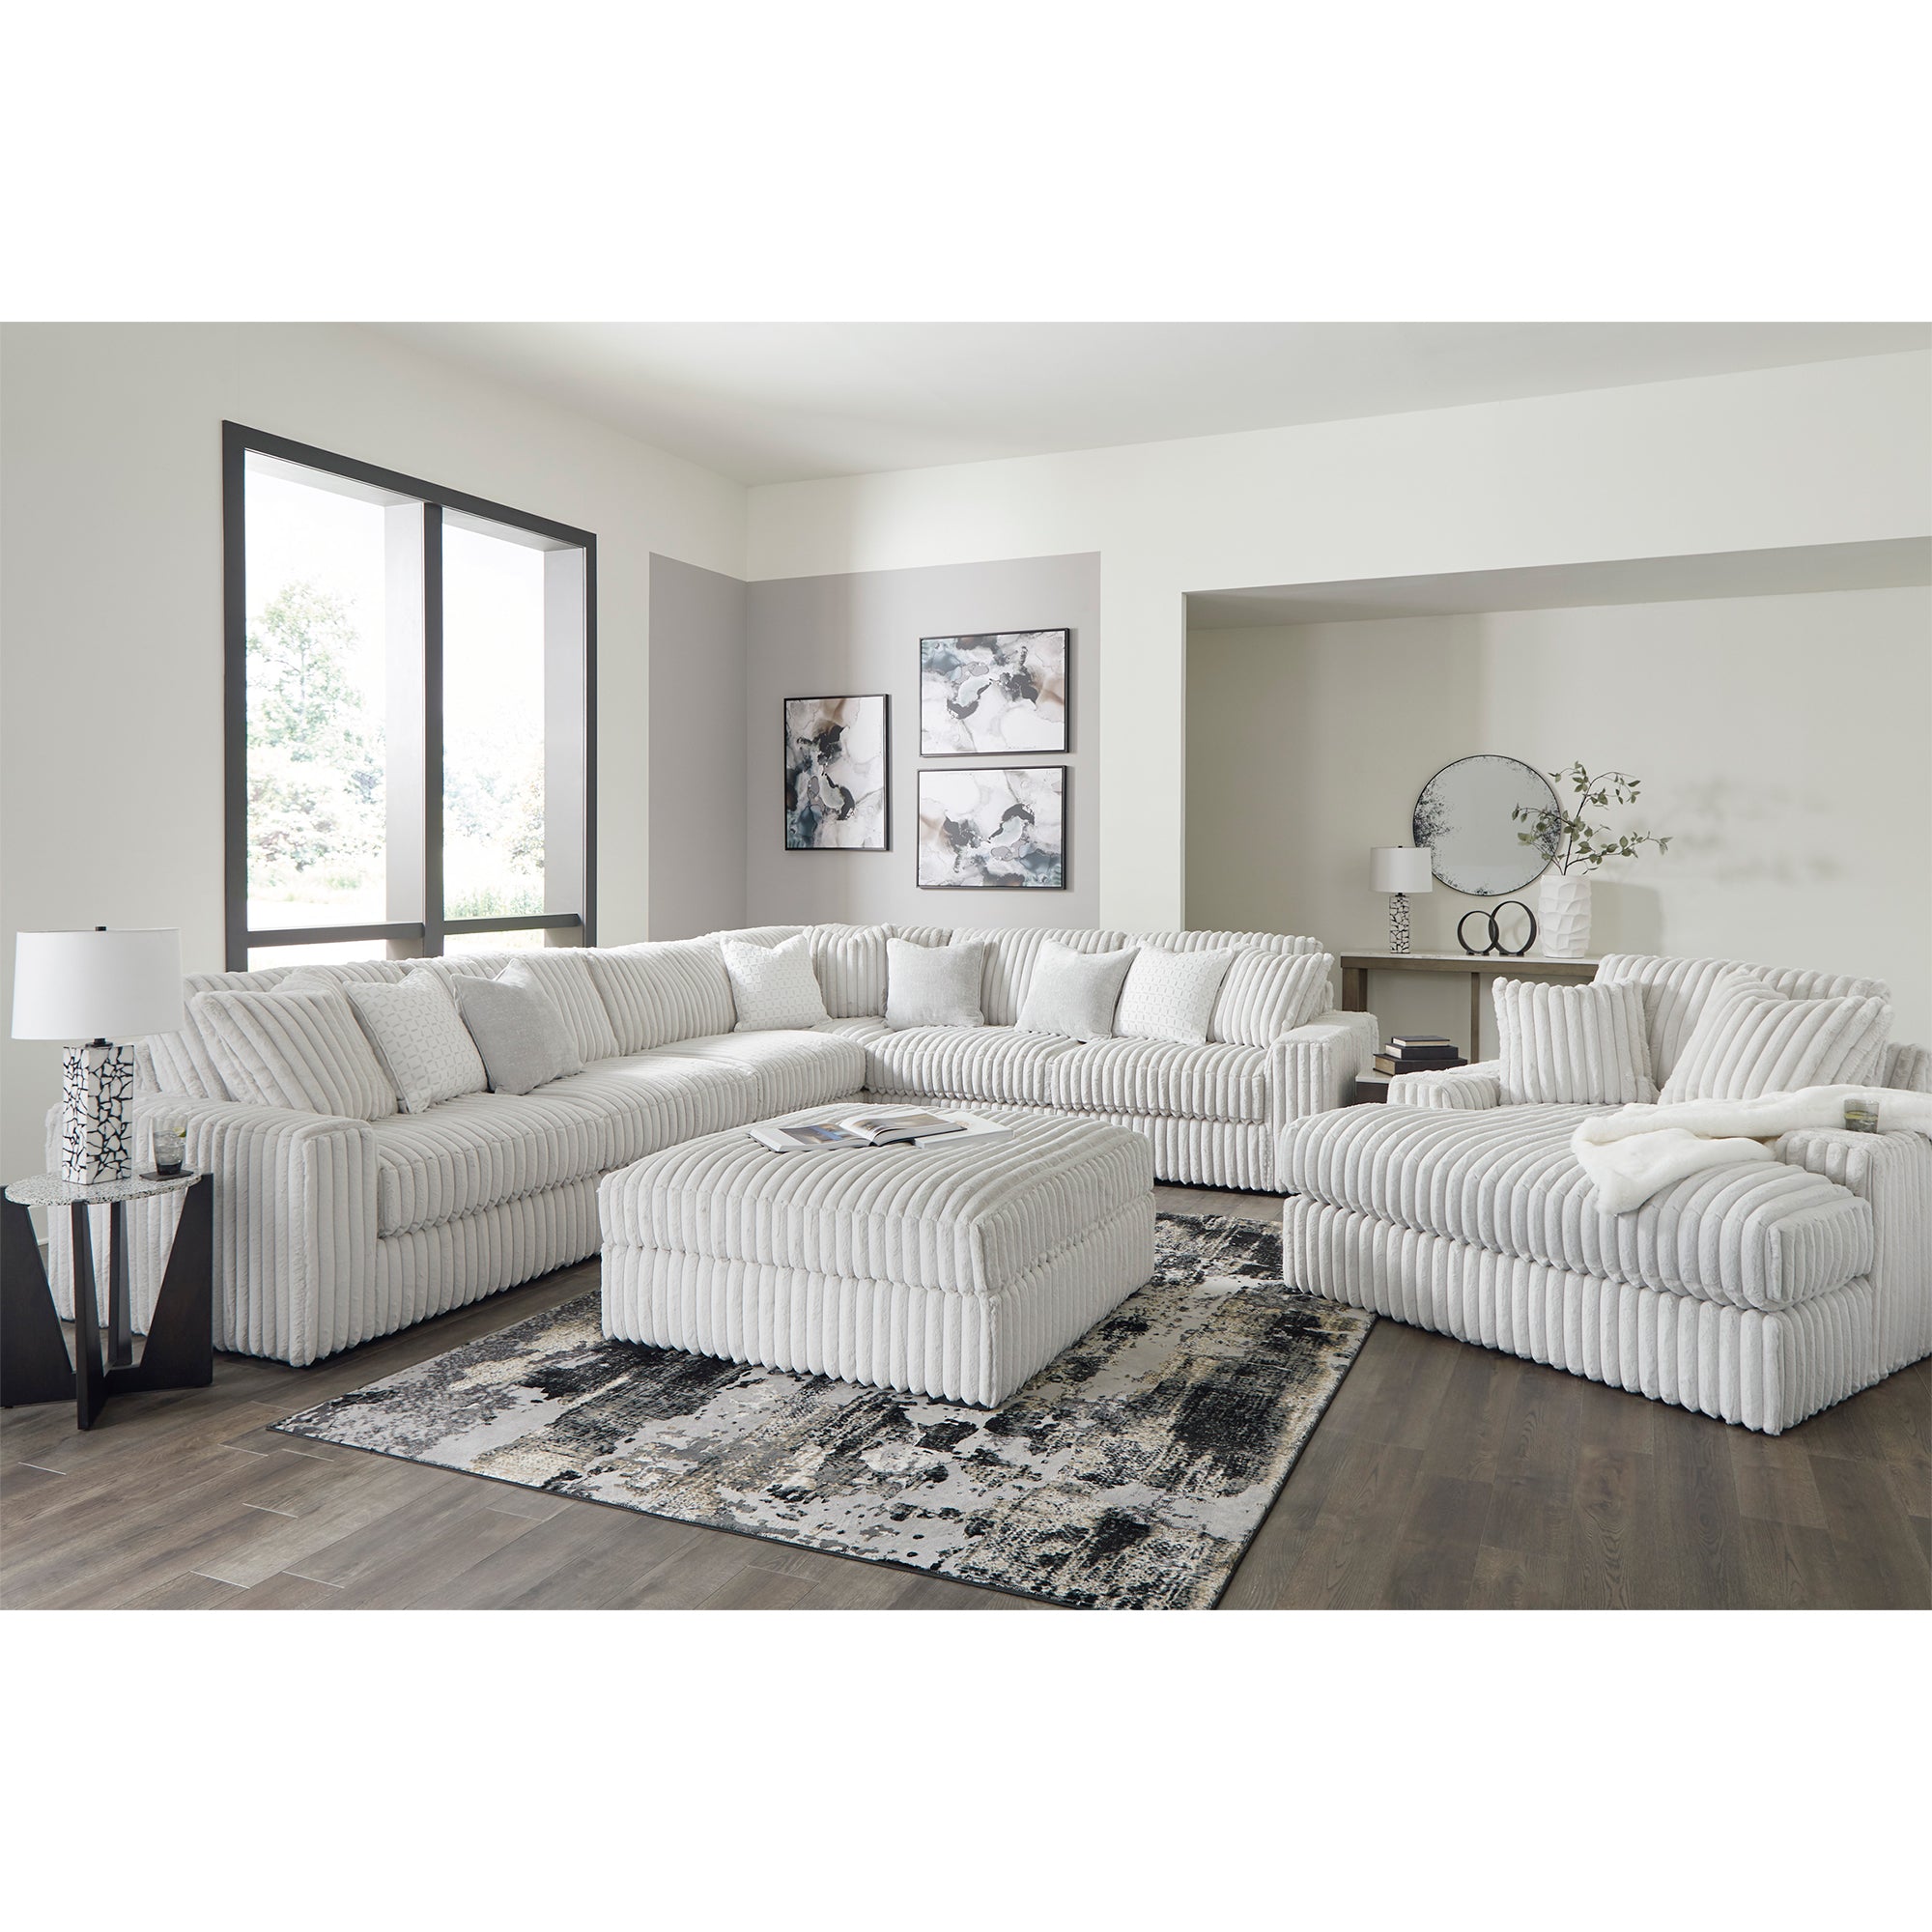 Chic Stupendous Sectional with reversible seat and back cushions, combines functionality with cozy design